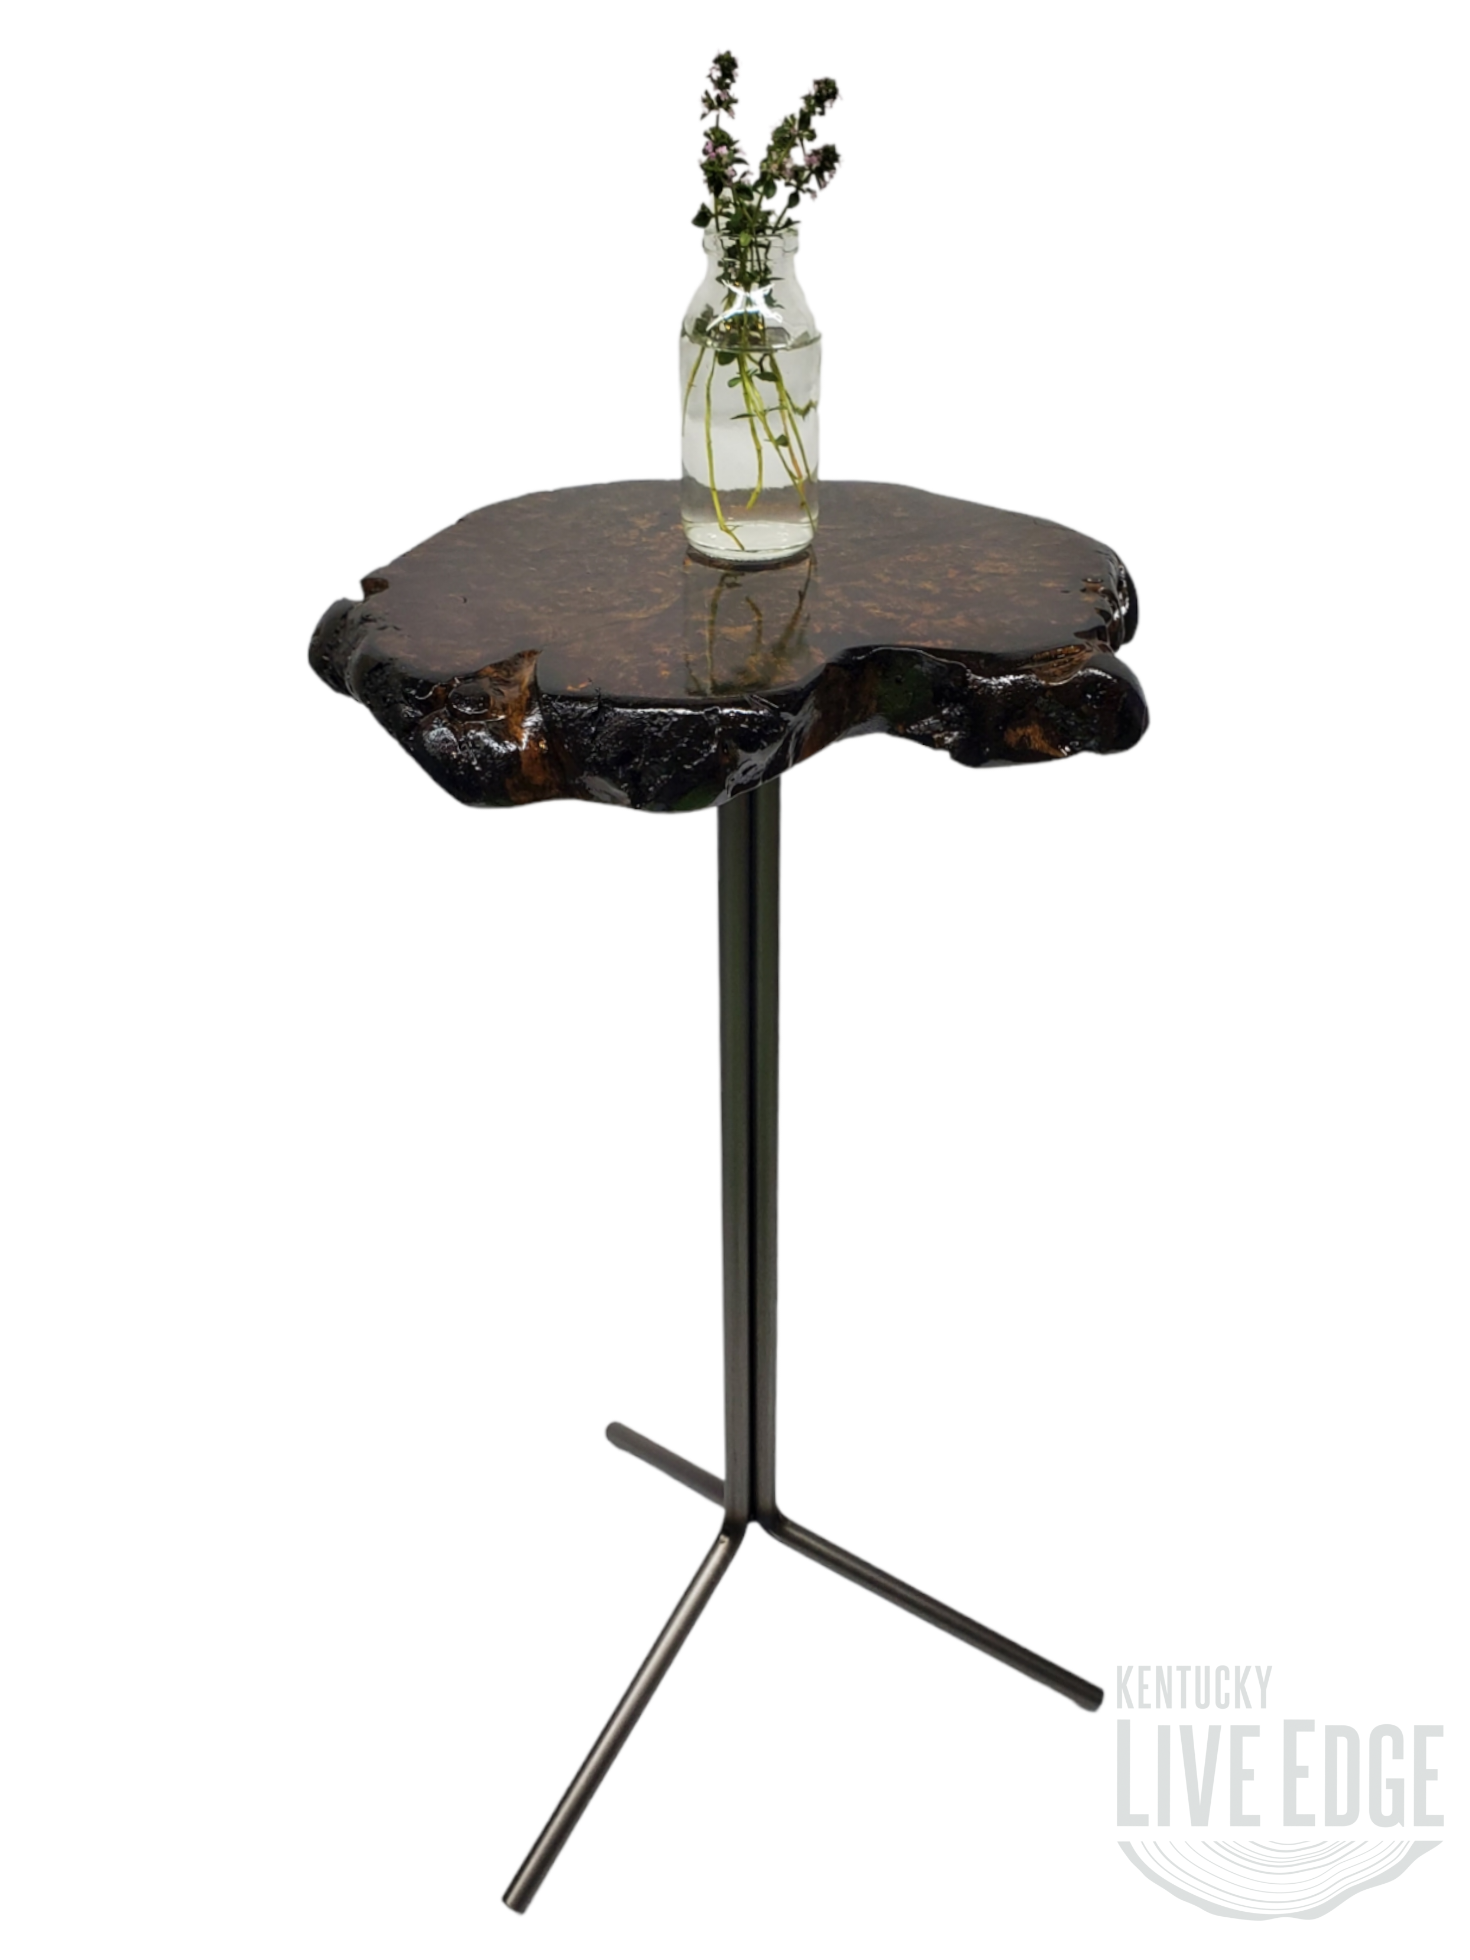 Cool Side Table- Maple Burl- Small End Table- Plant Stand- Tree Slice- Natural Wood- Industrial- Live Edge Table- Dark Wood Table- Espresso